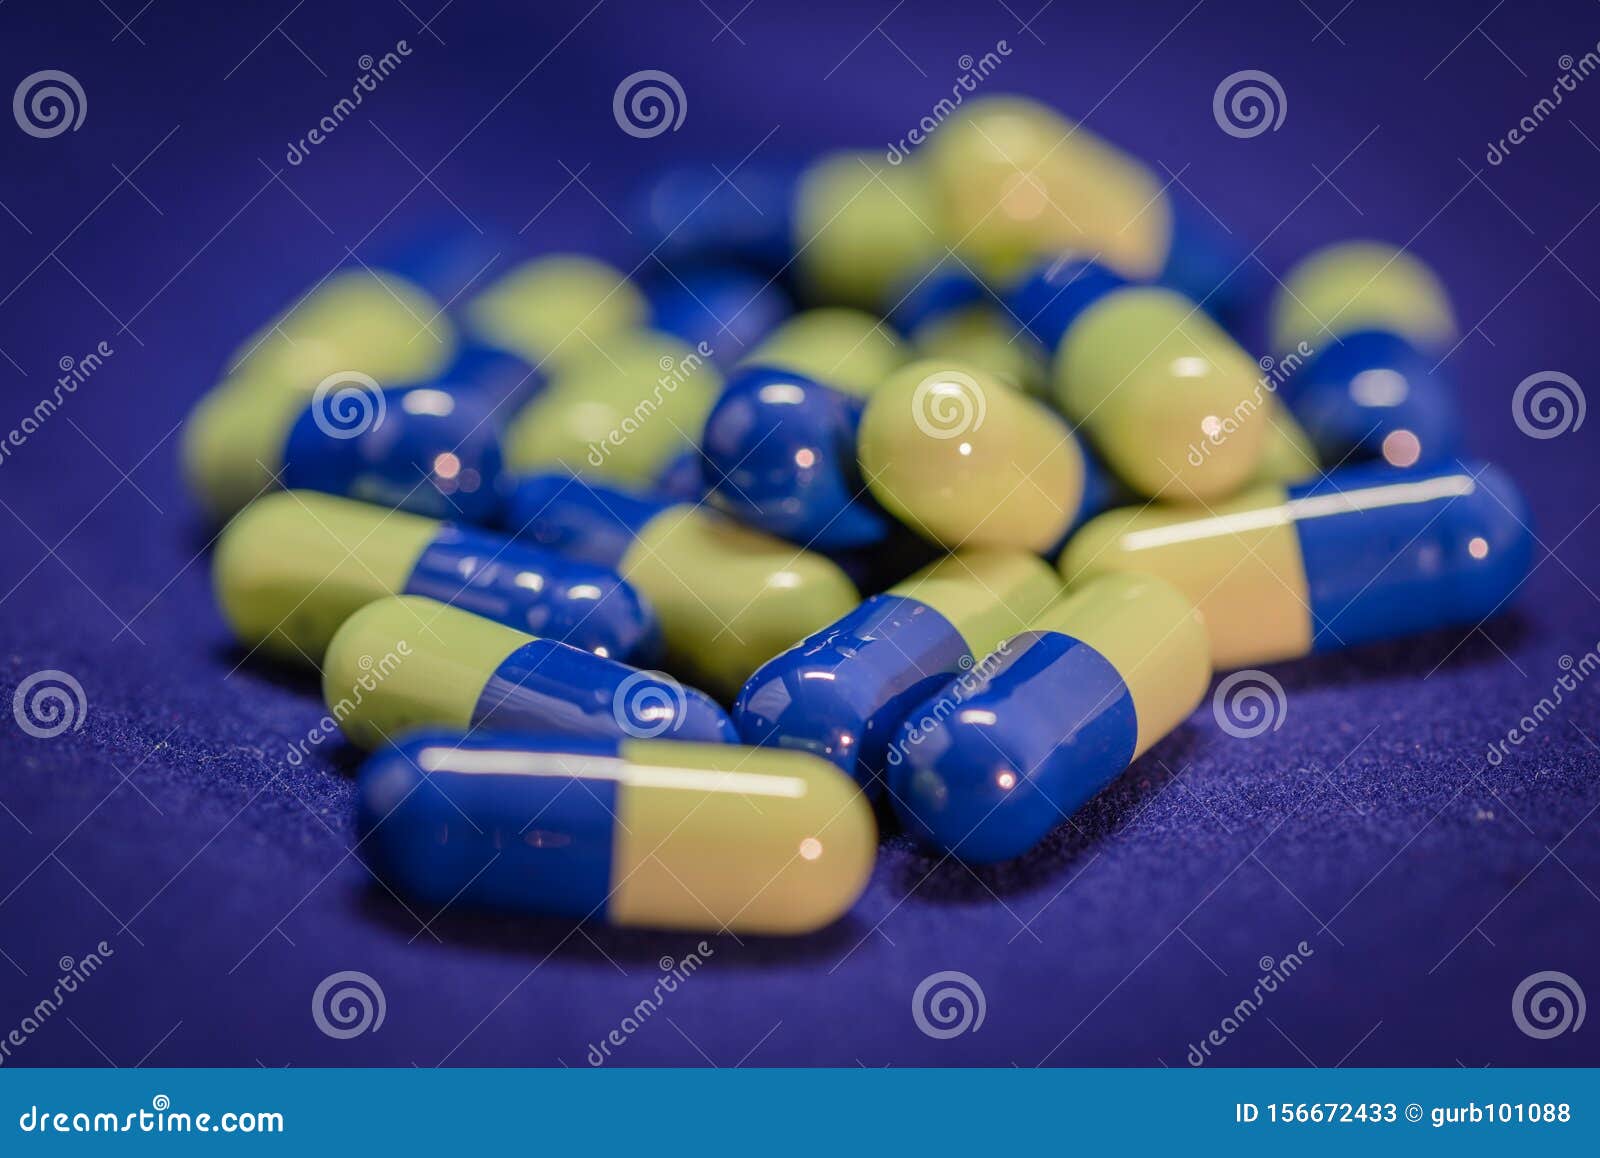 Blue and yellow capsules stock image. Image of enclose 156672433